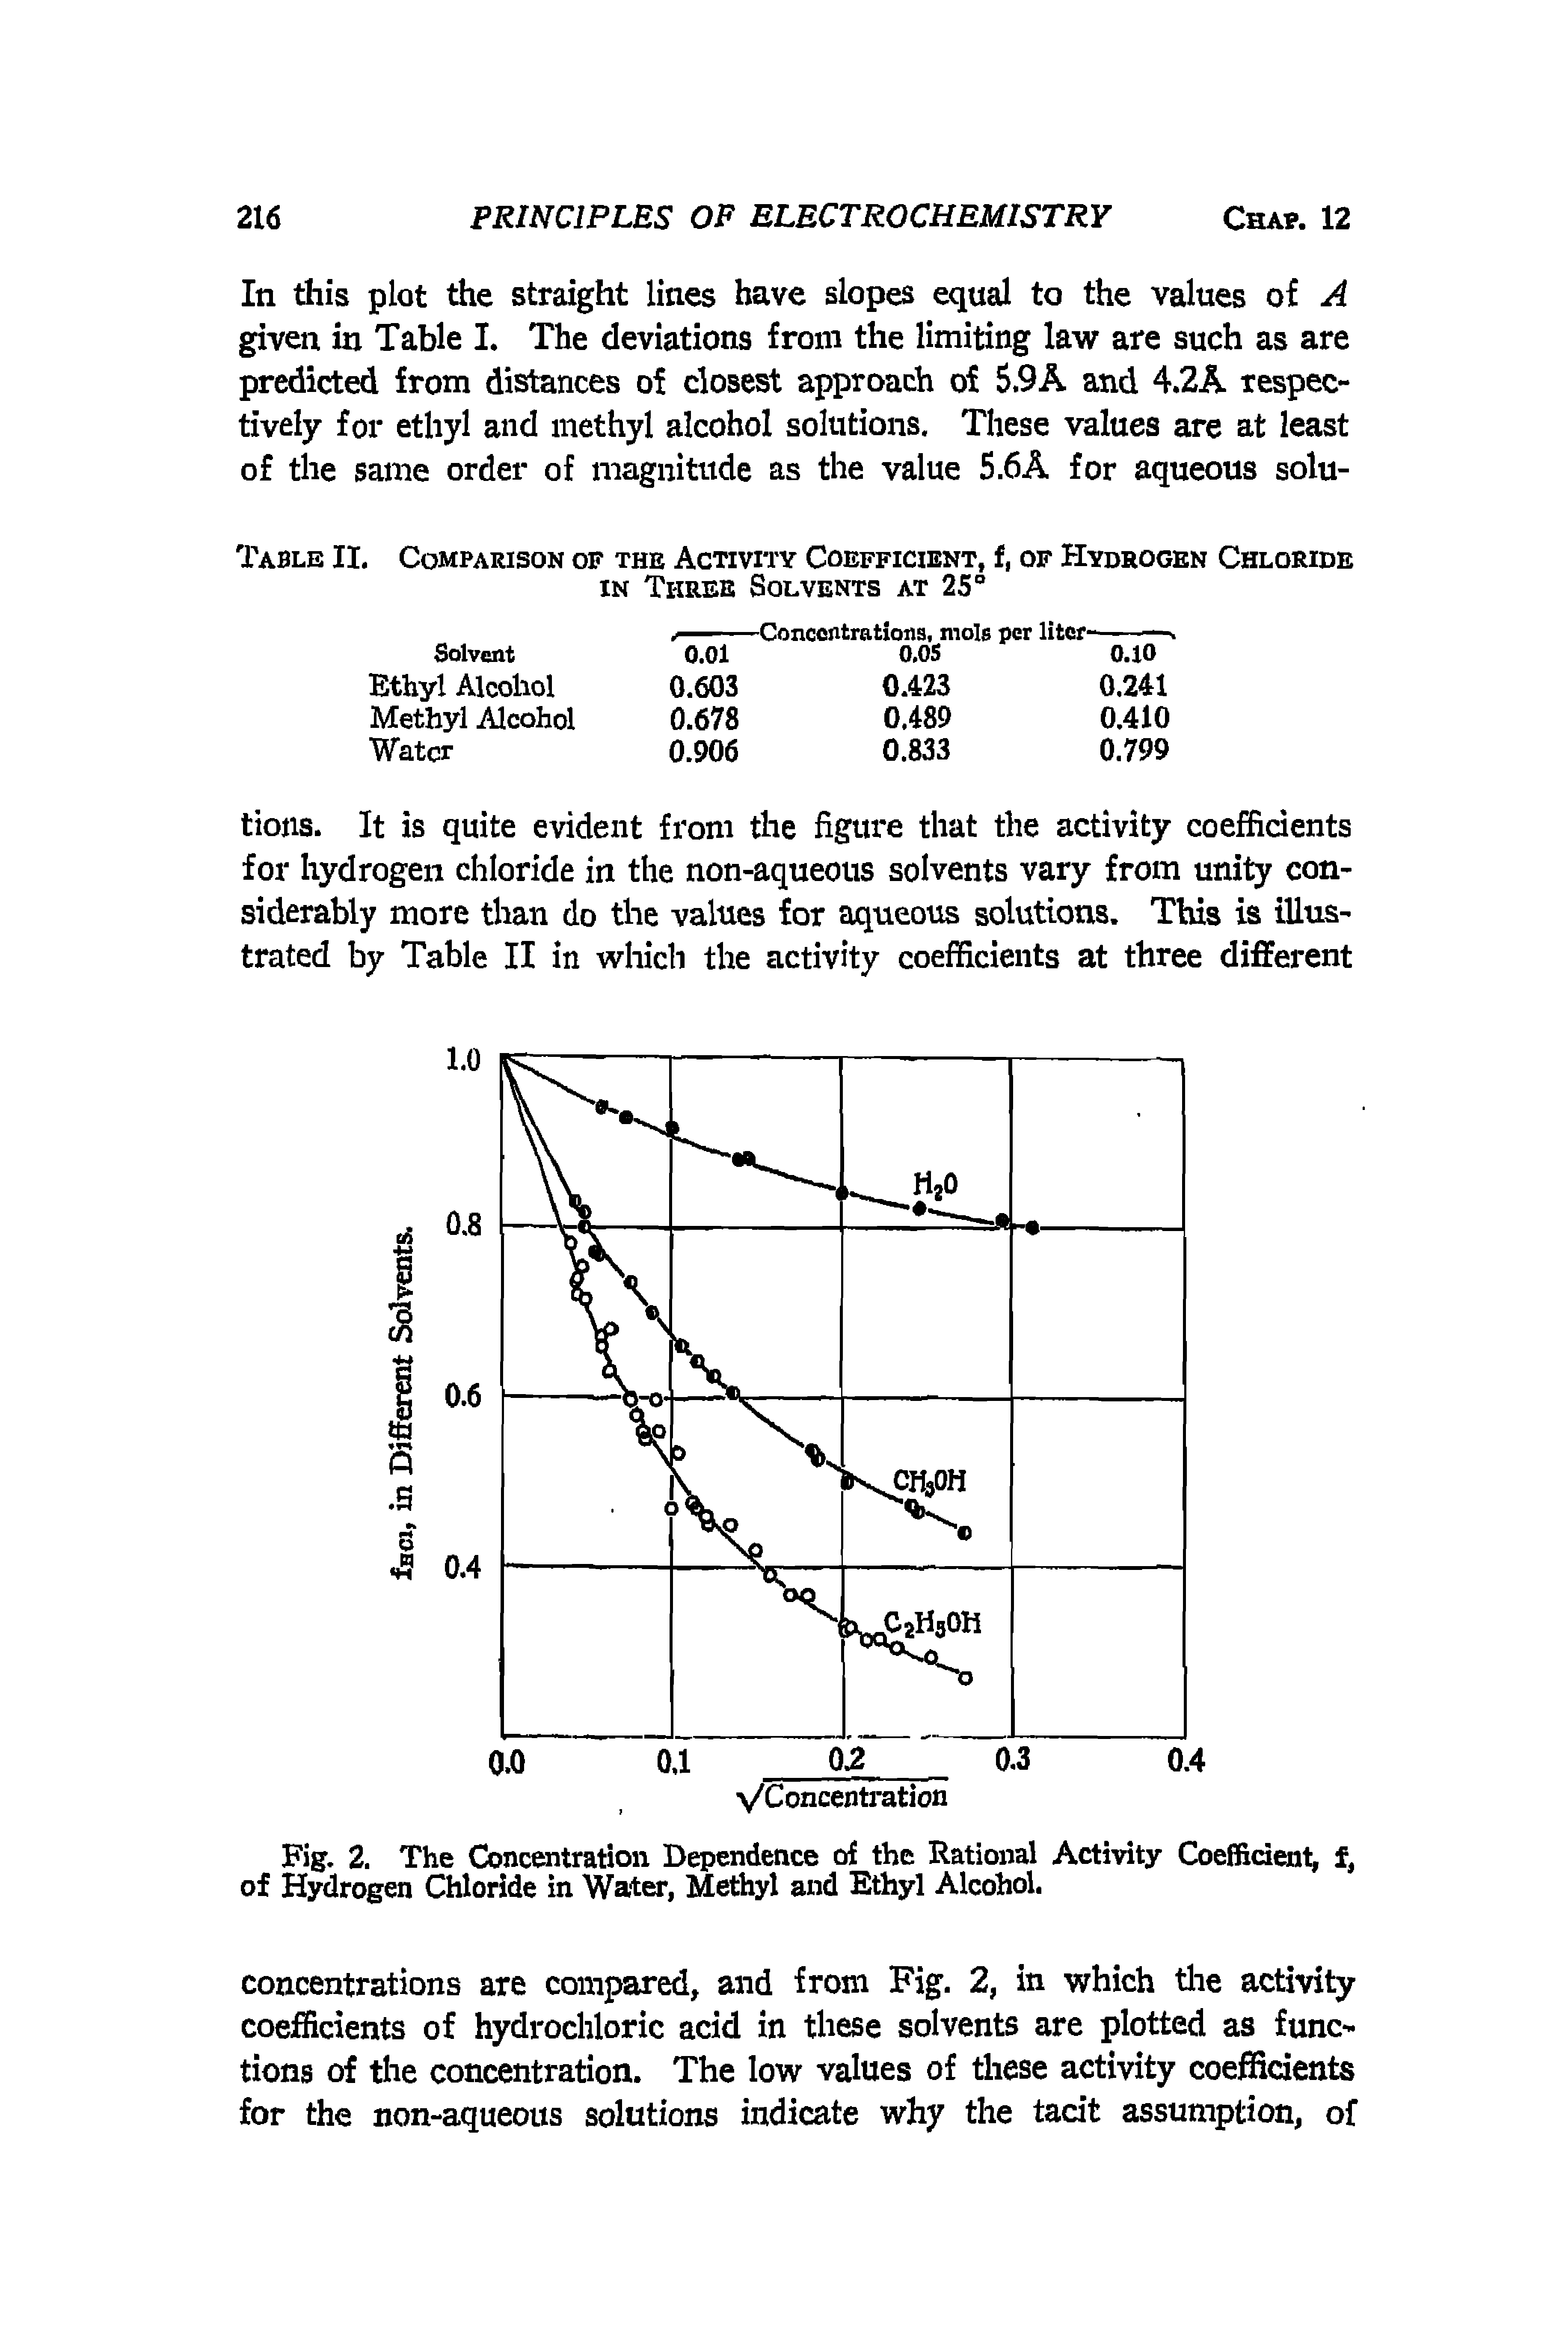 Fig. 2. The Concentration Dependence of the Rational Activity Coefficient, f, of Hydrogen Chloride in Water, Methyl and Ethyl Alcohol.